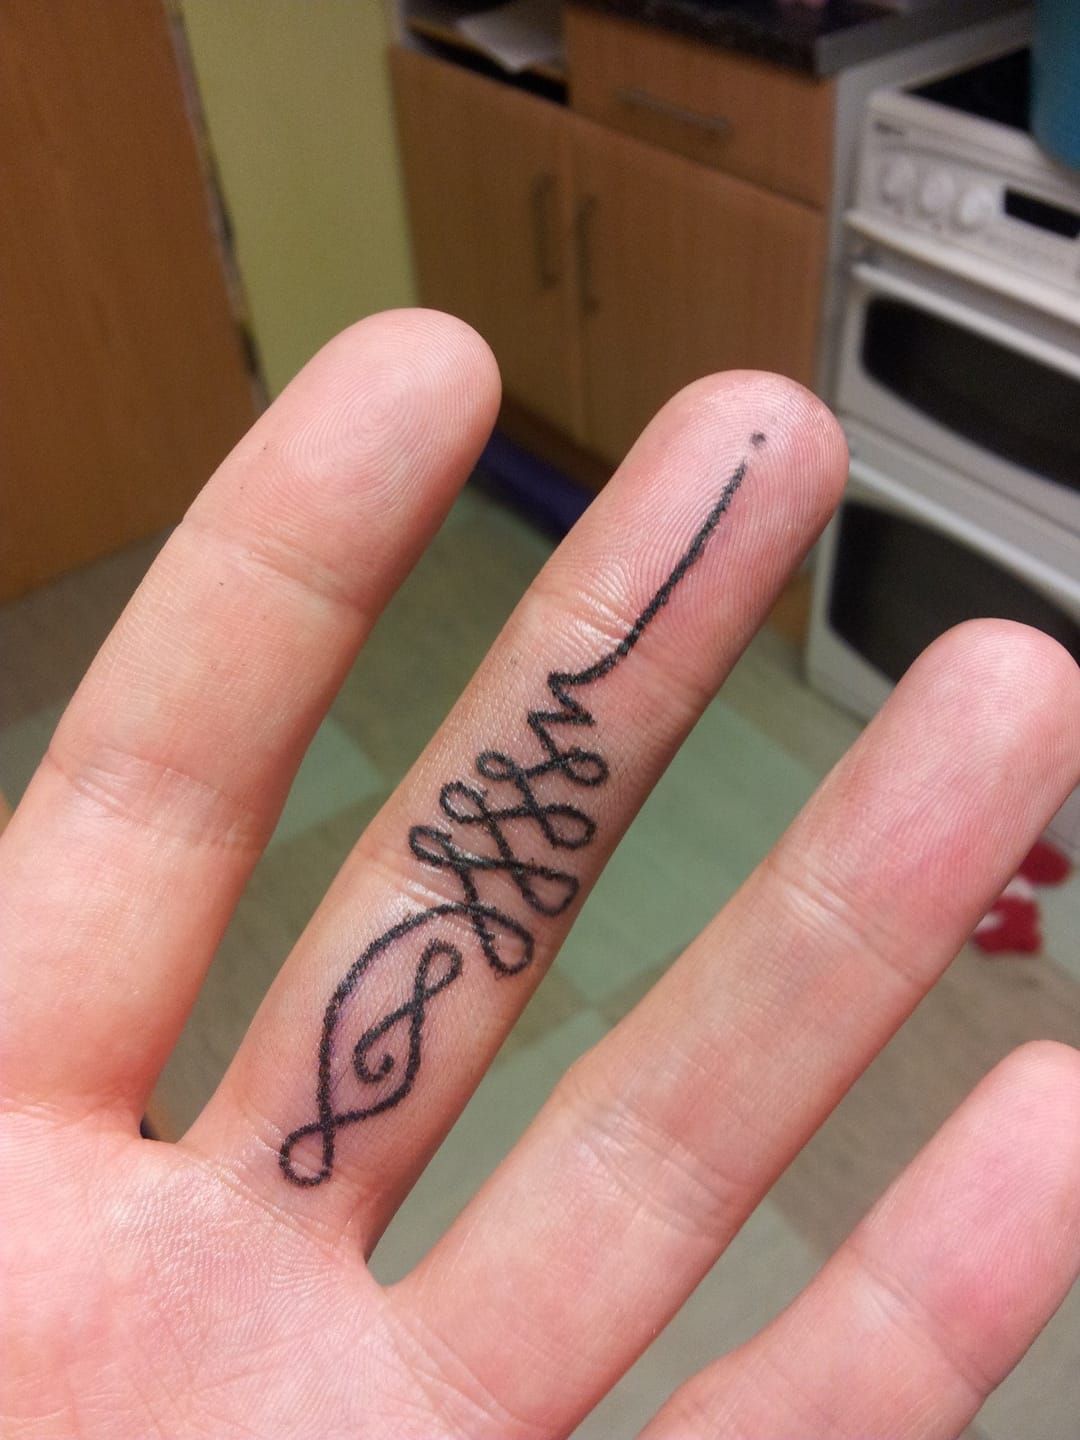 Brothers Ink NZ  Hand spider and stick n poke fingers  Facebook